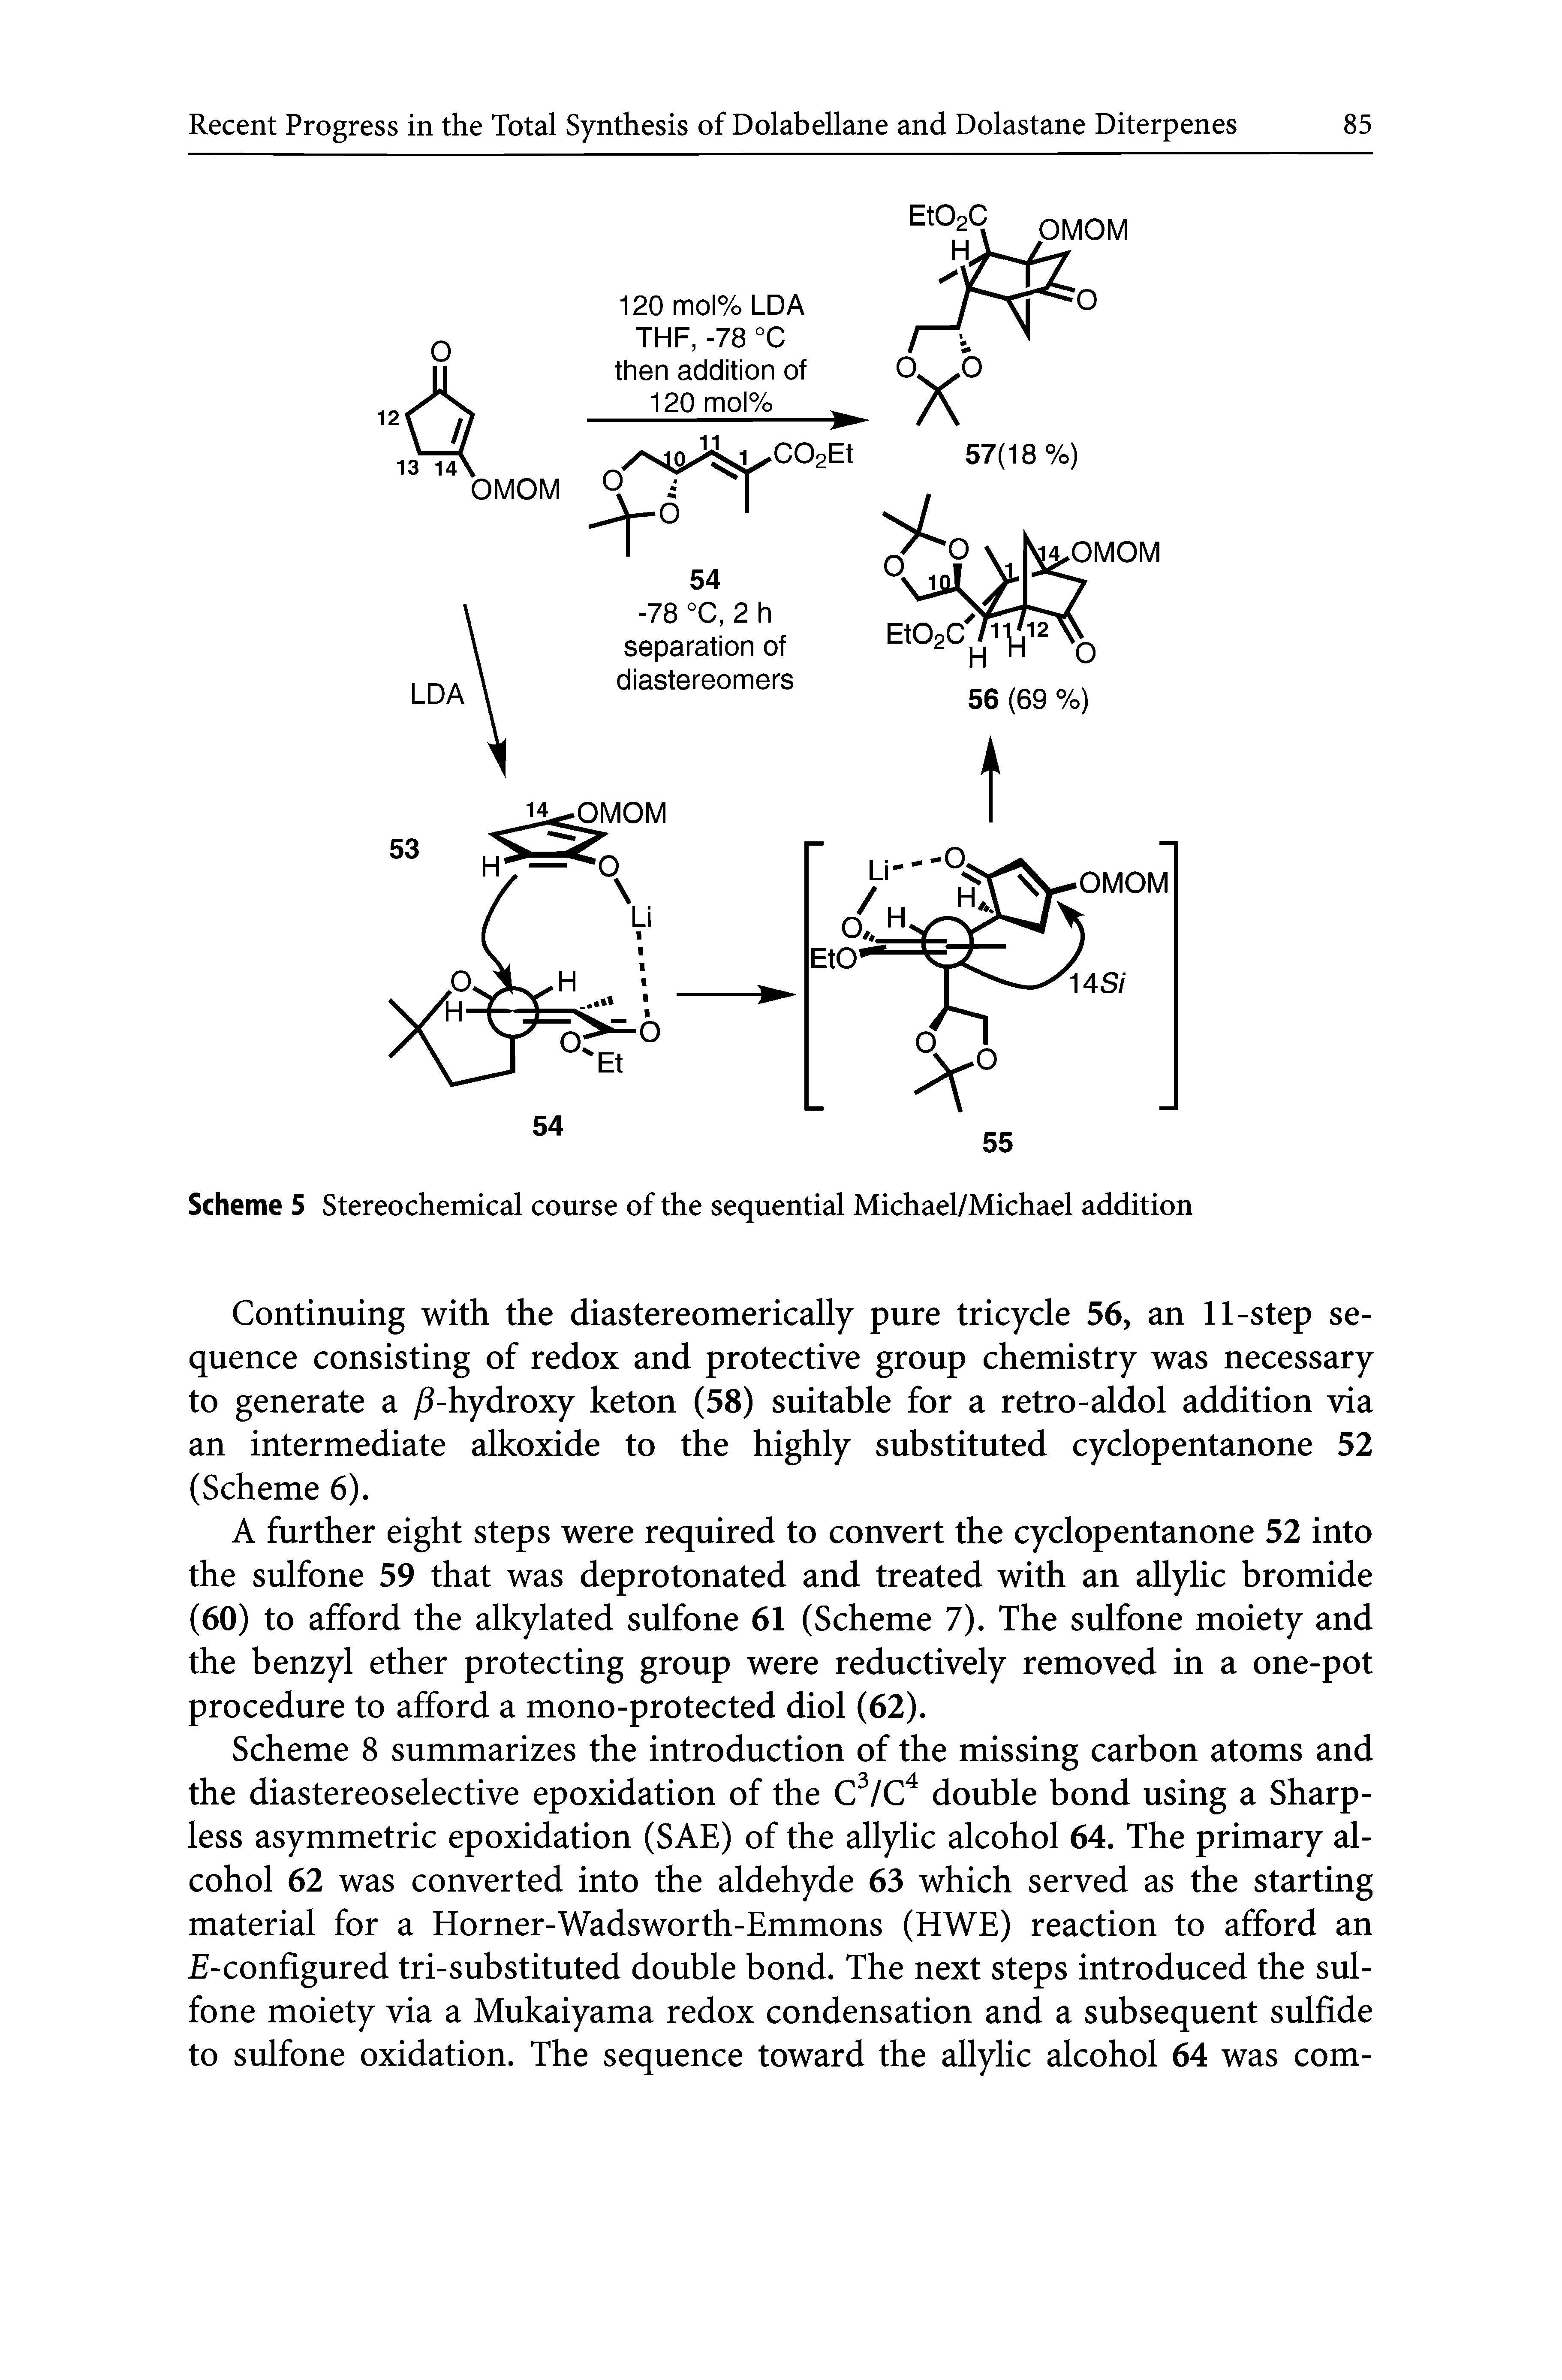 Scheme 5 Stereochemical course of the sequential Michael/Michael addition...